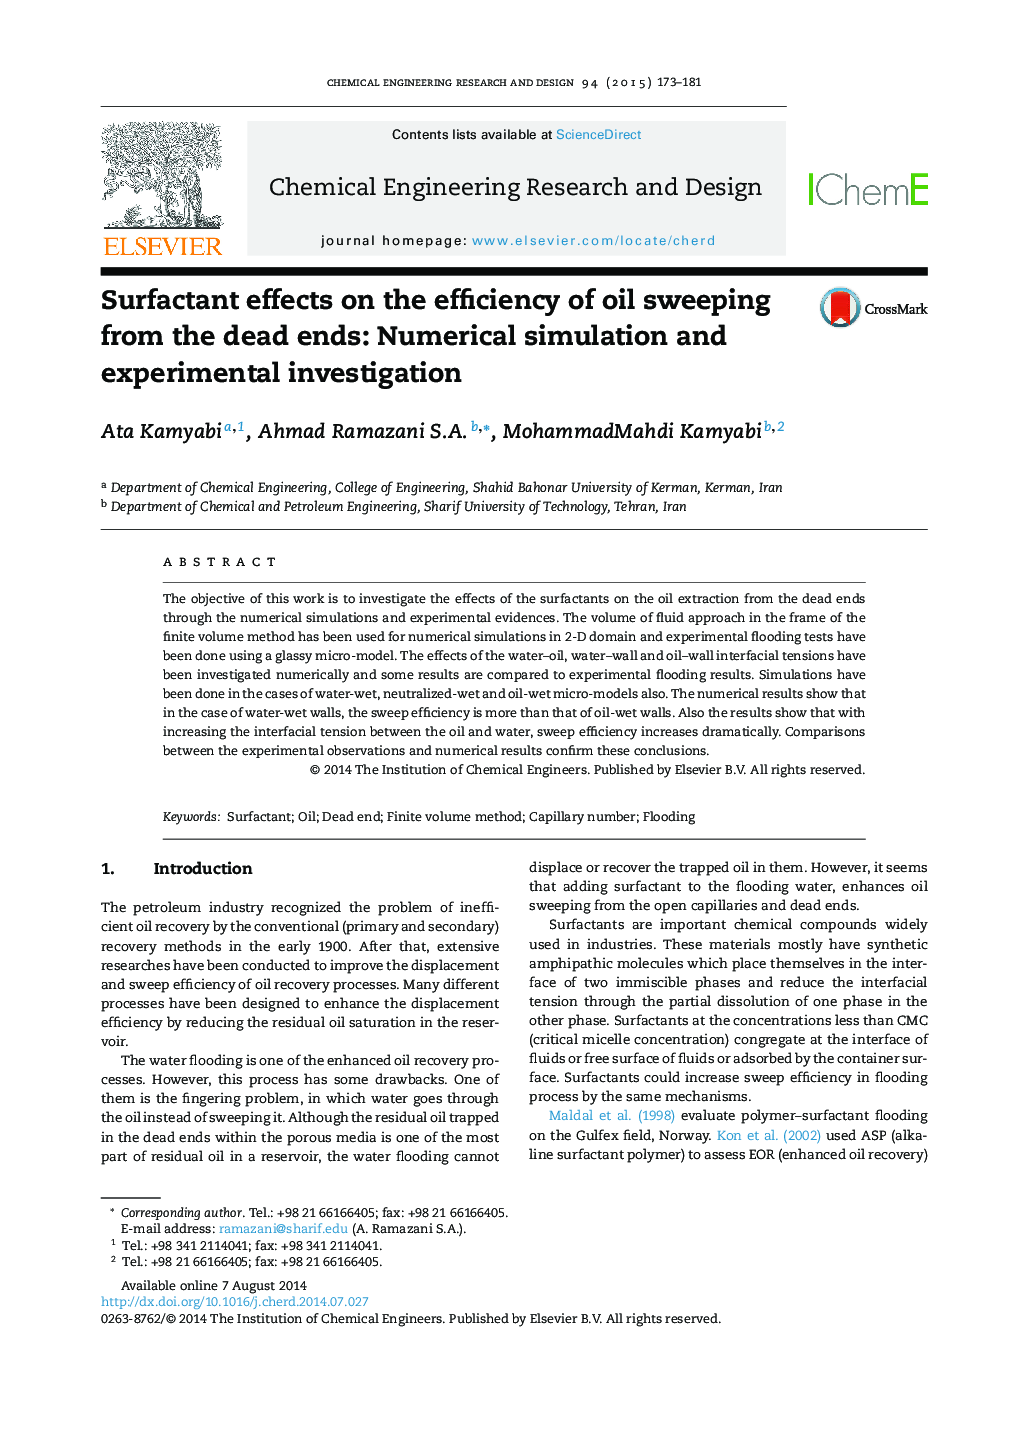 Surfactant effects on the efficiency of oil sweeping from the dead ends: Numerical simulation and experimental investigation